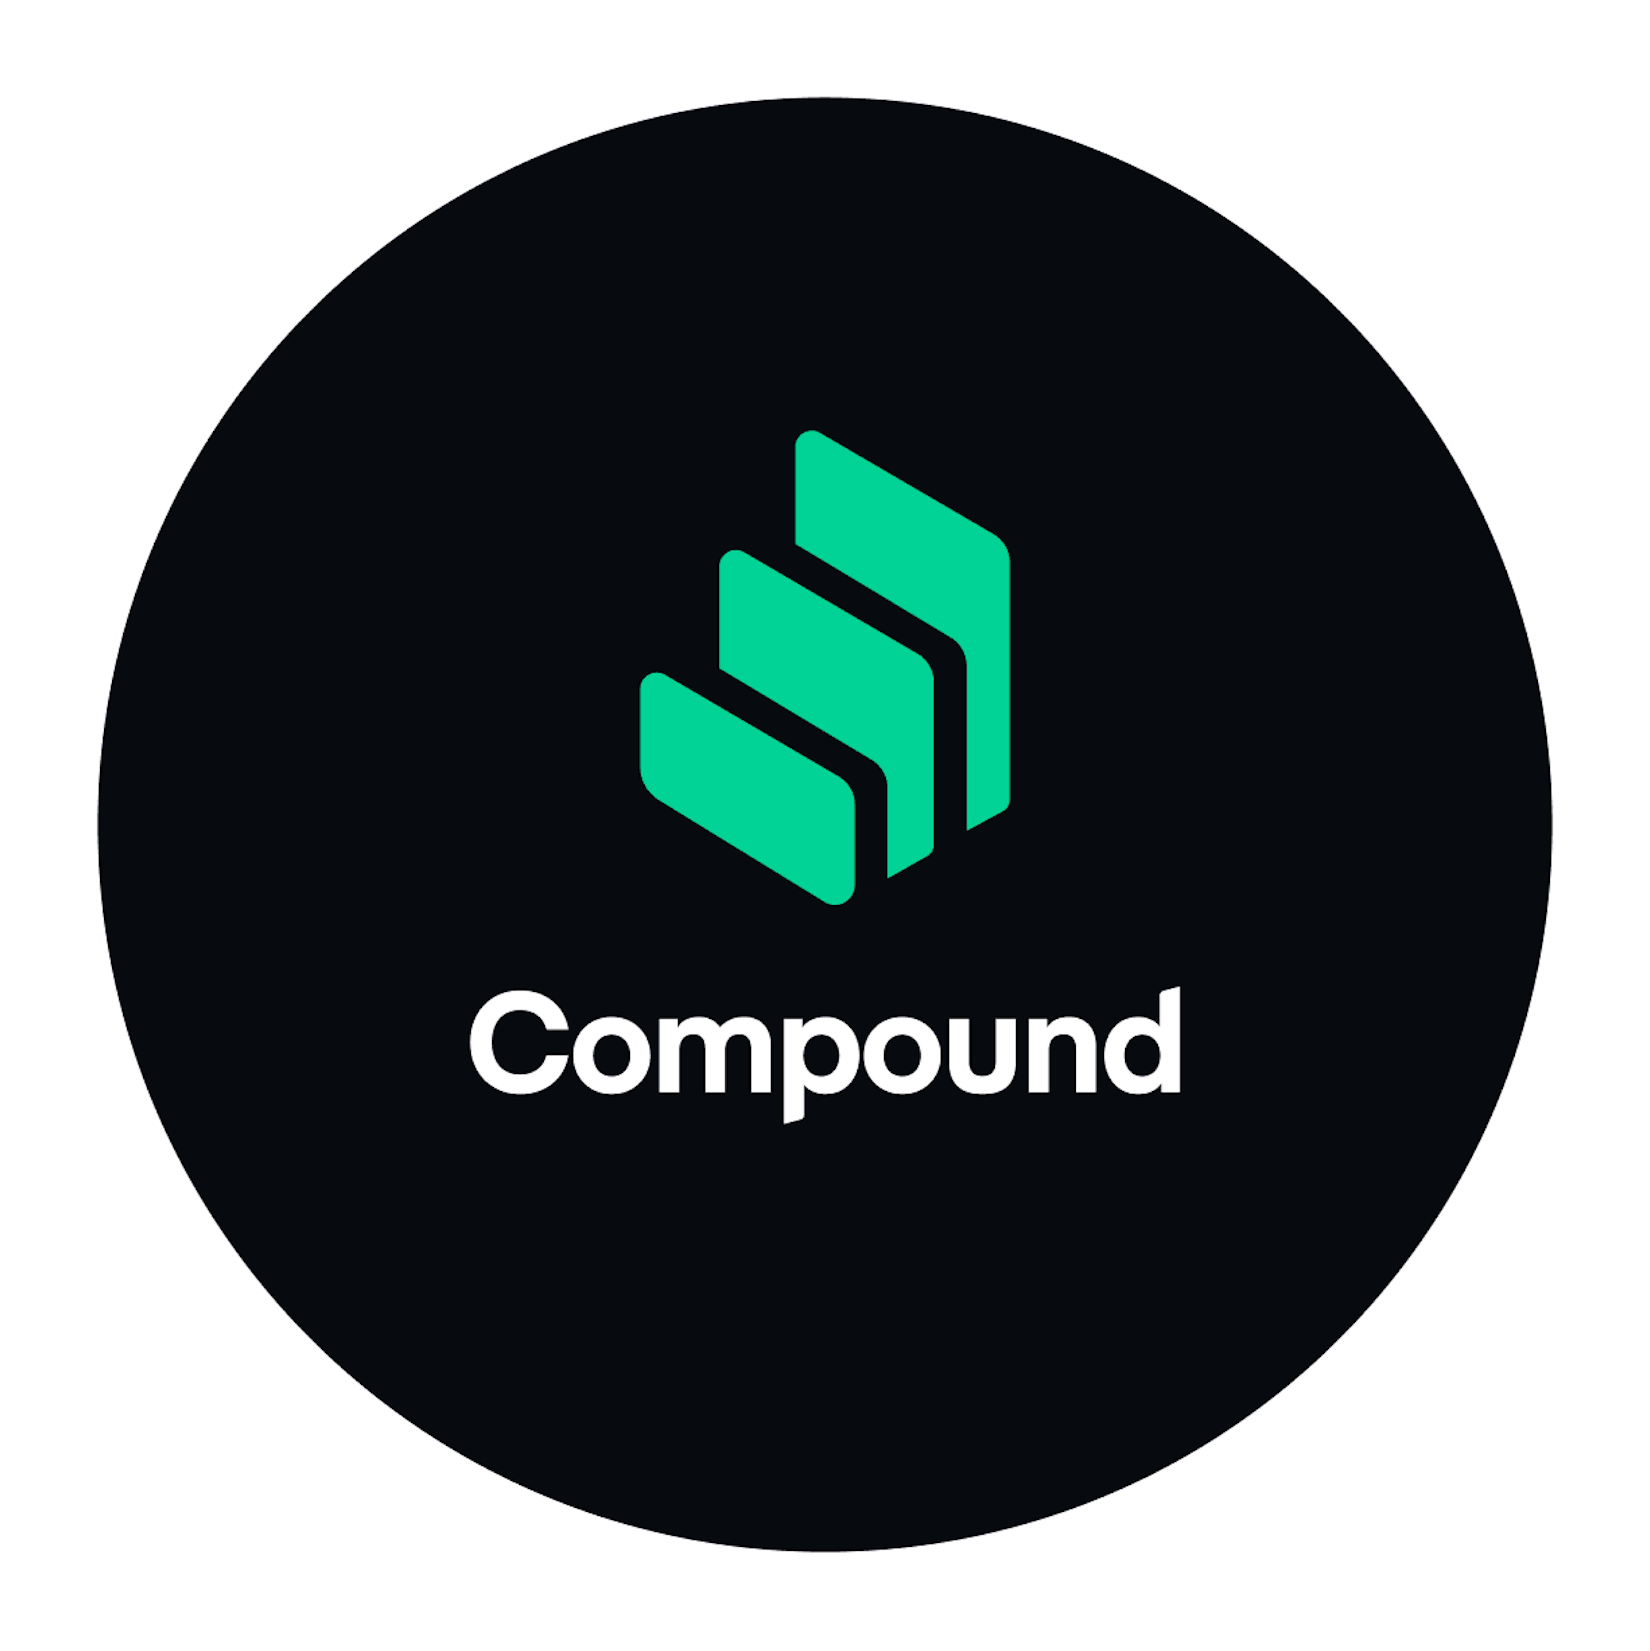 PoolTogether, Uniswap, Tokensets, MakerDAO, Dai, Compound